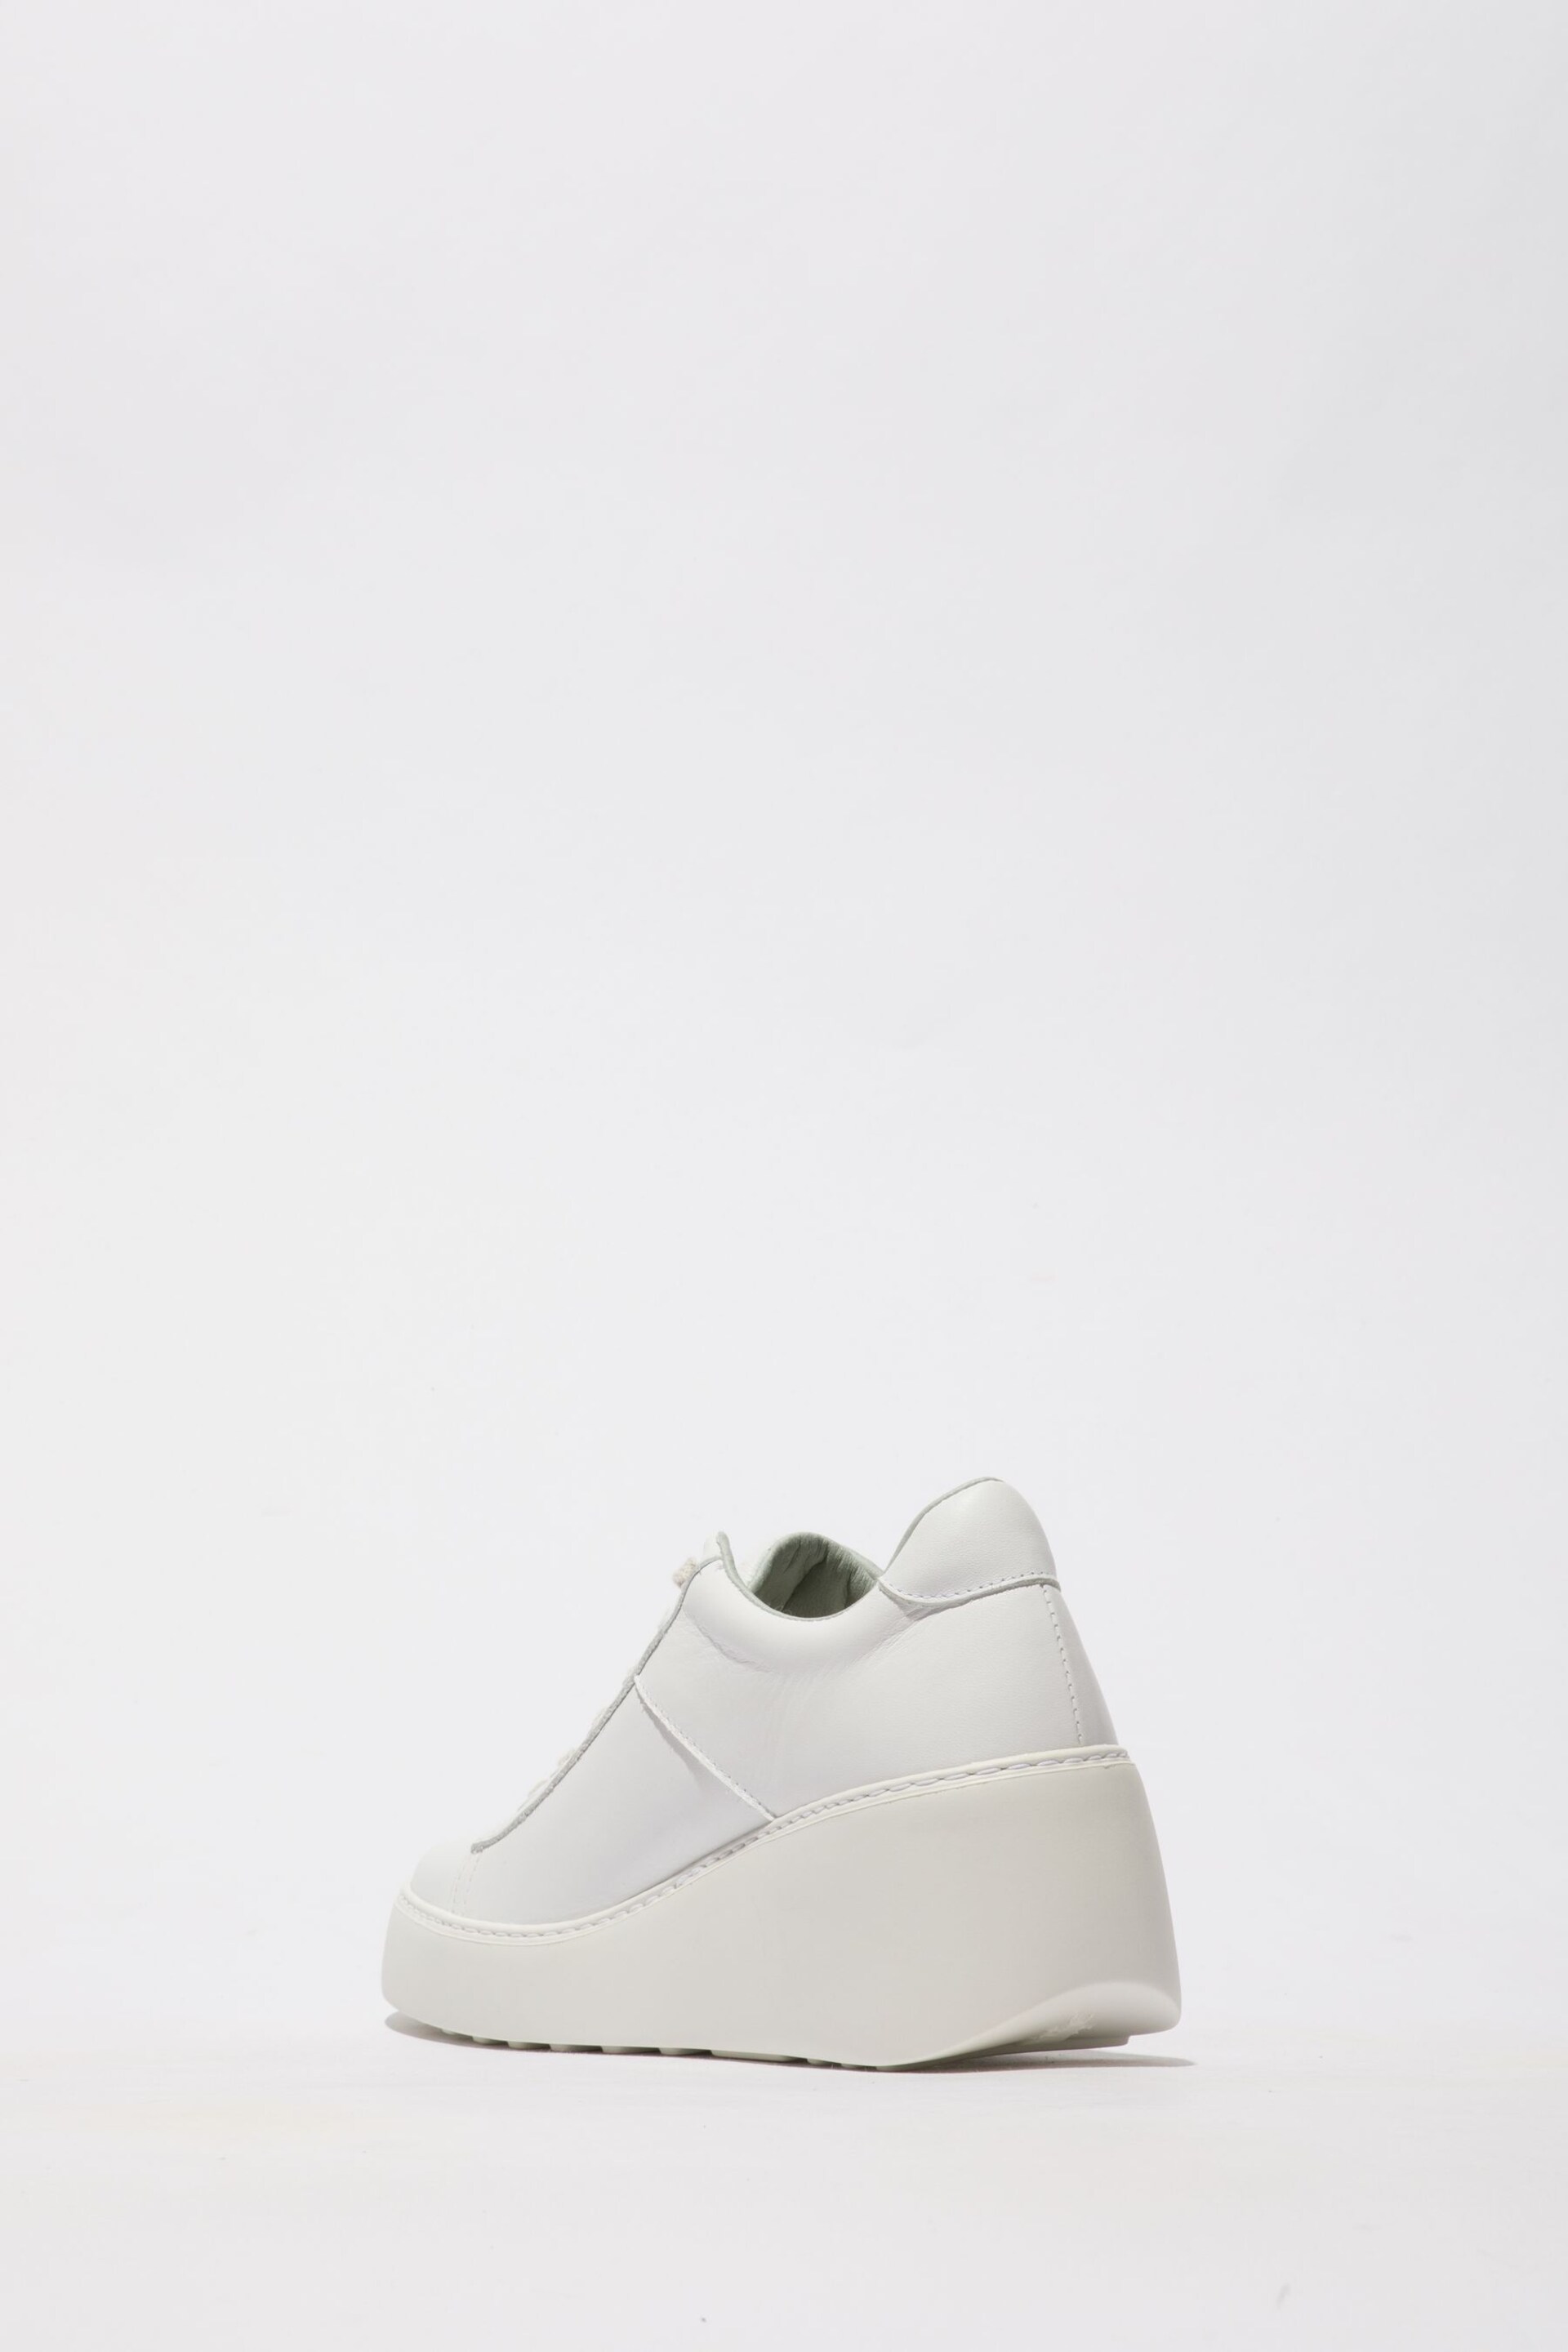 Fly London White Delf Wedge Trainers - Image 2 of 4